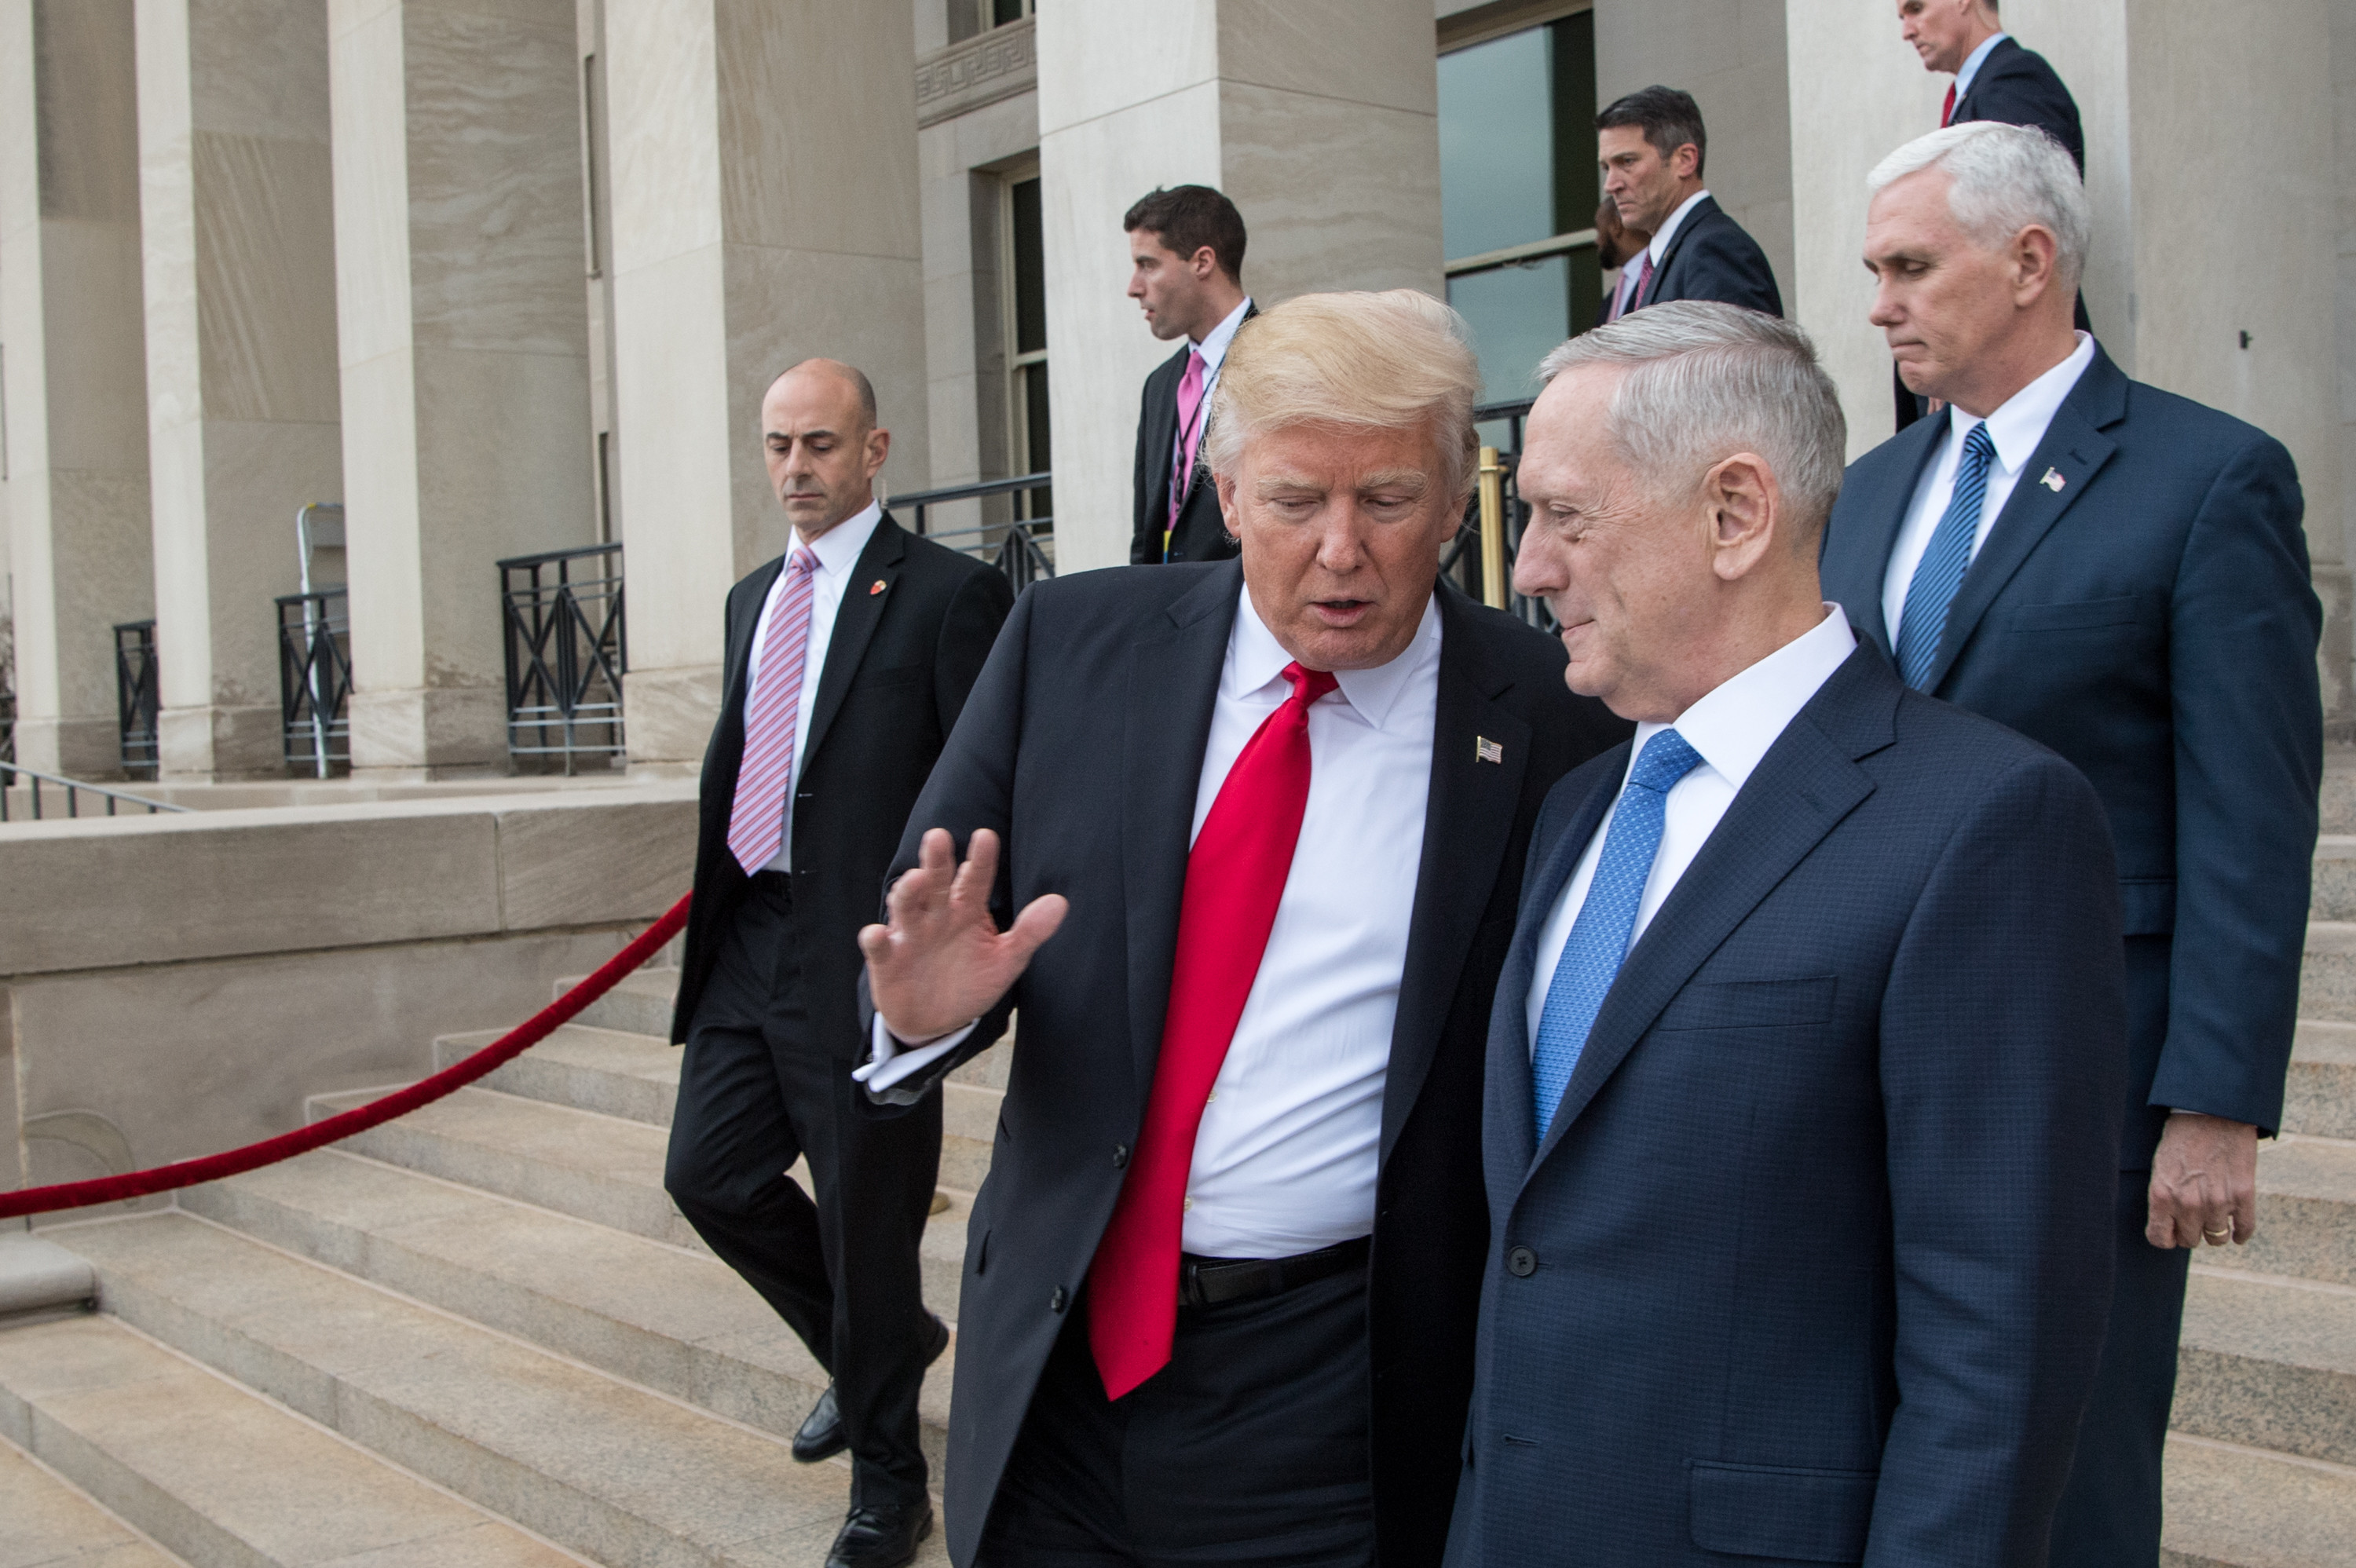 SecDef James Mattis (middle) leaving the Pentagon with president Donald Trump and vice president Mike Pence.